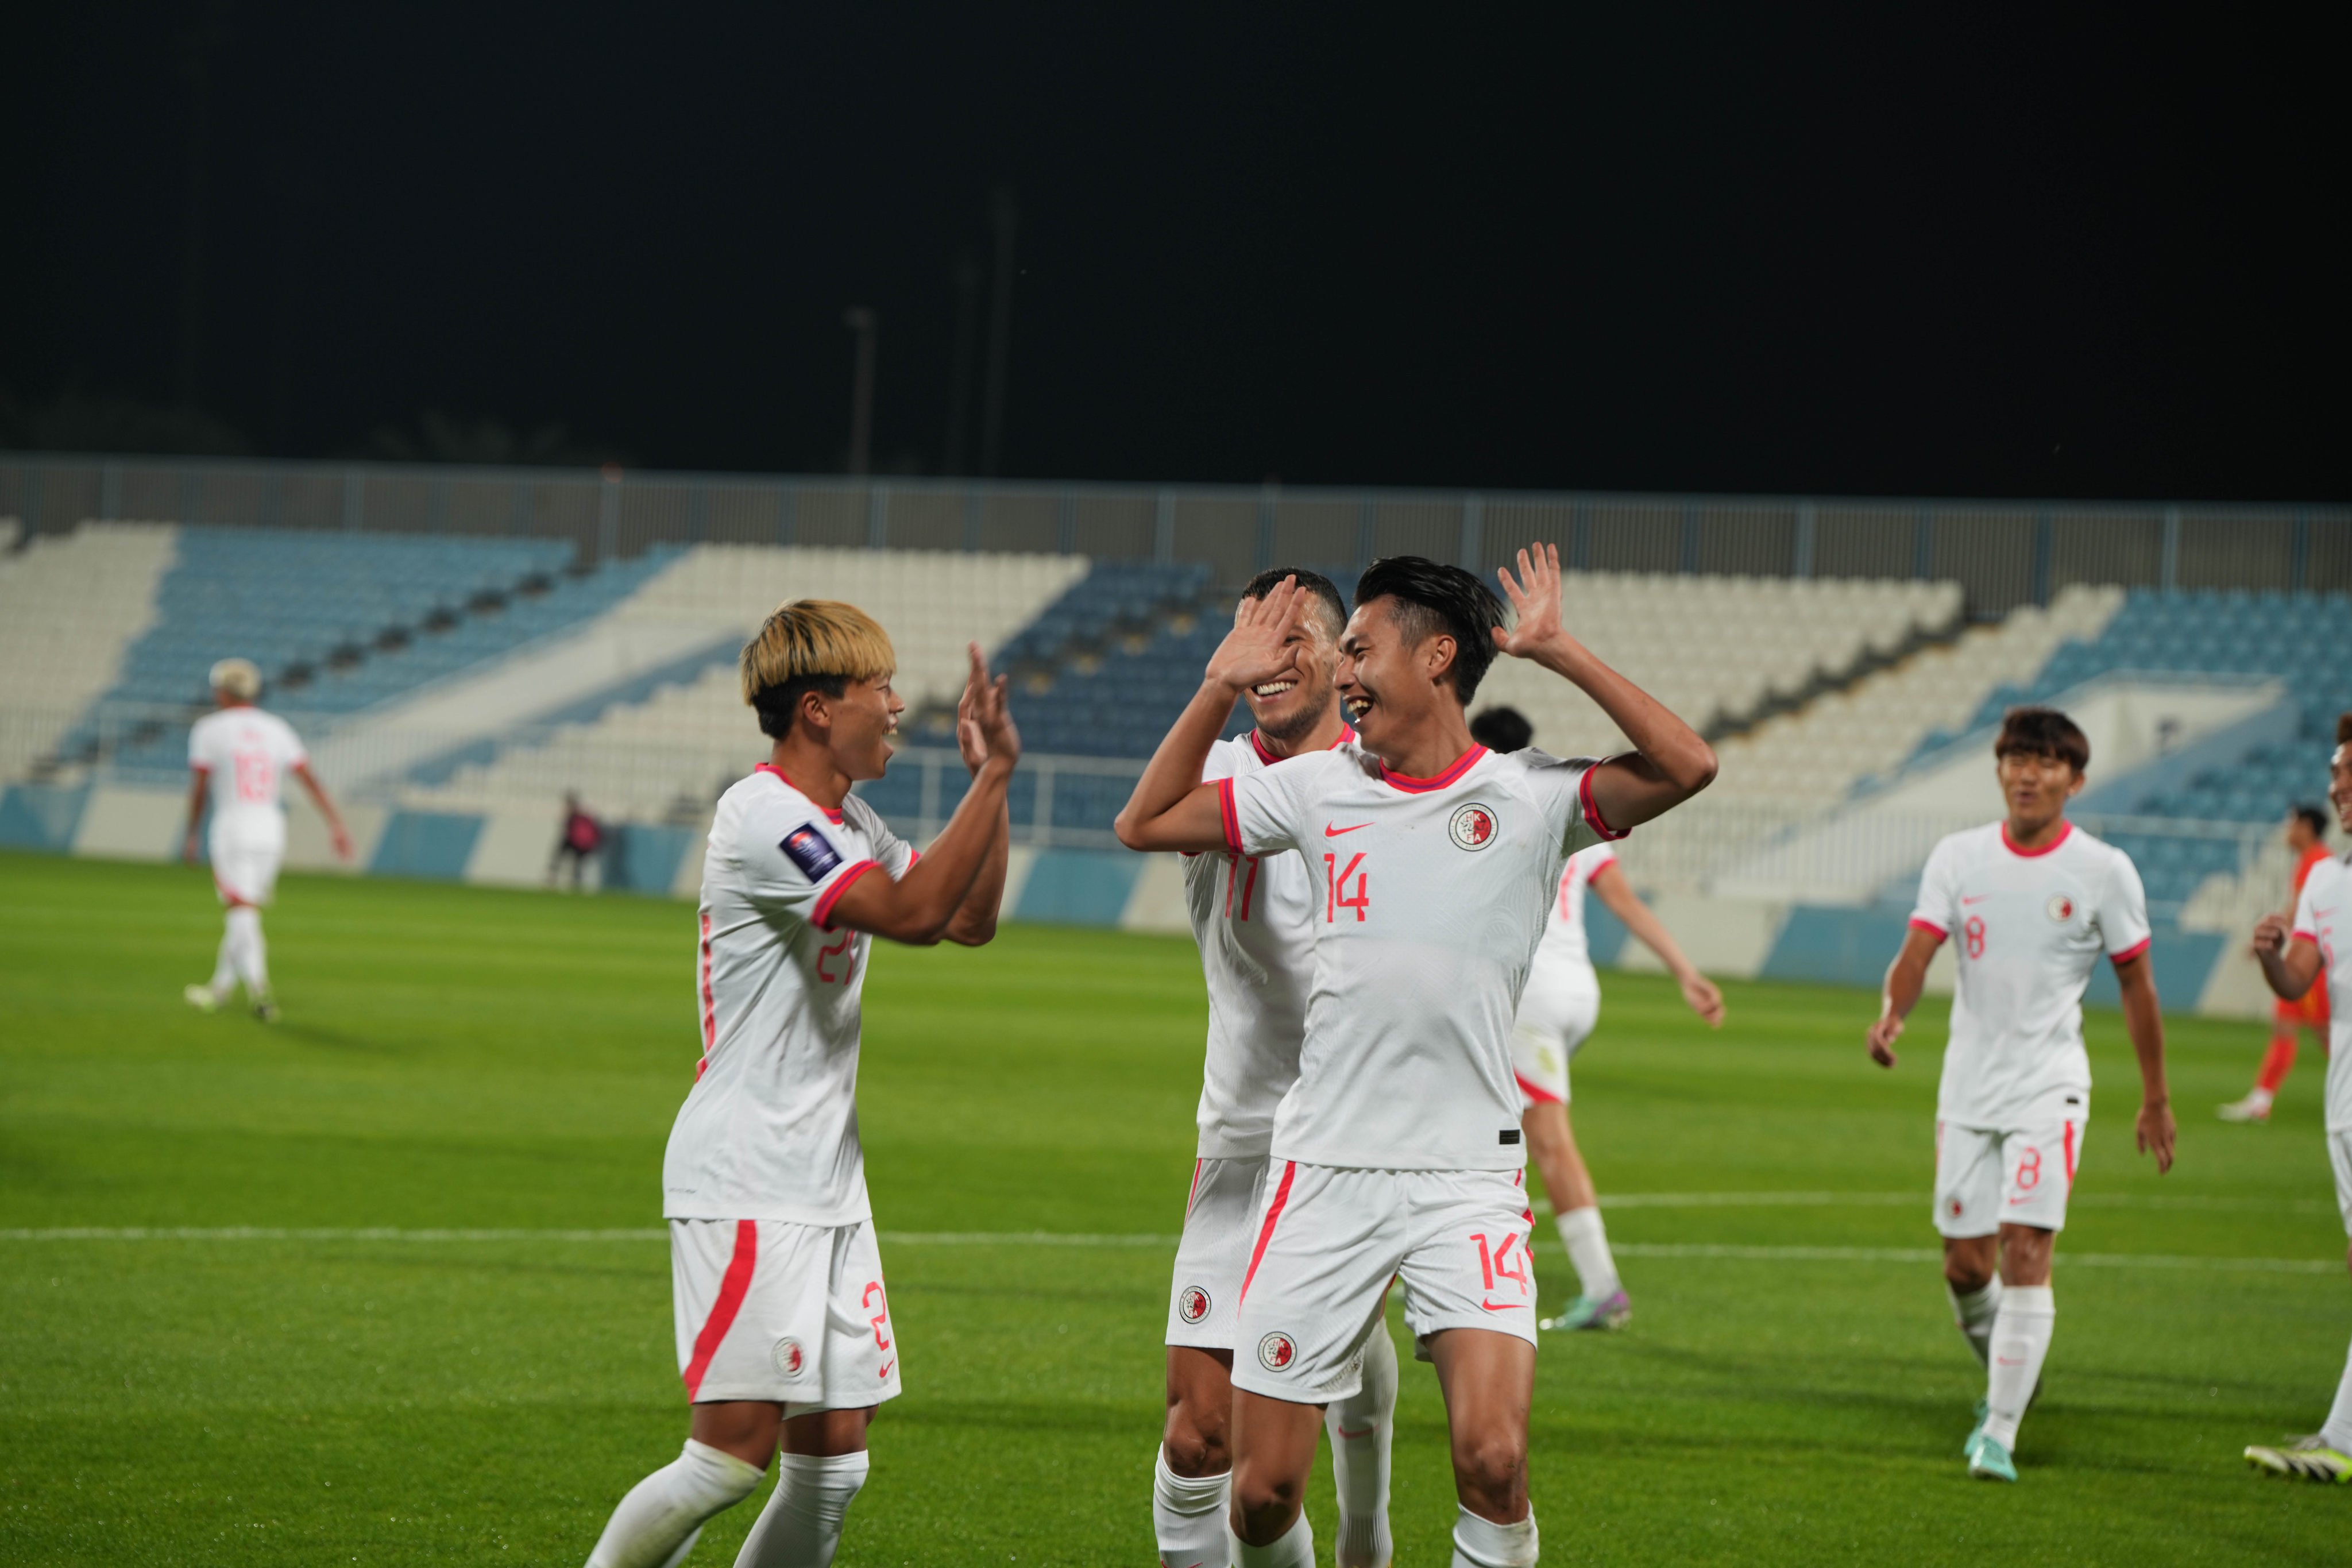 Poon Pui-hin (centre) scored twice in Hong Kong’s first win over China in 29 years. Photo: HKFA